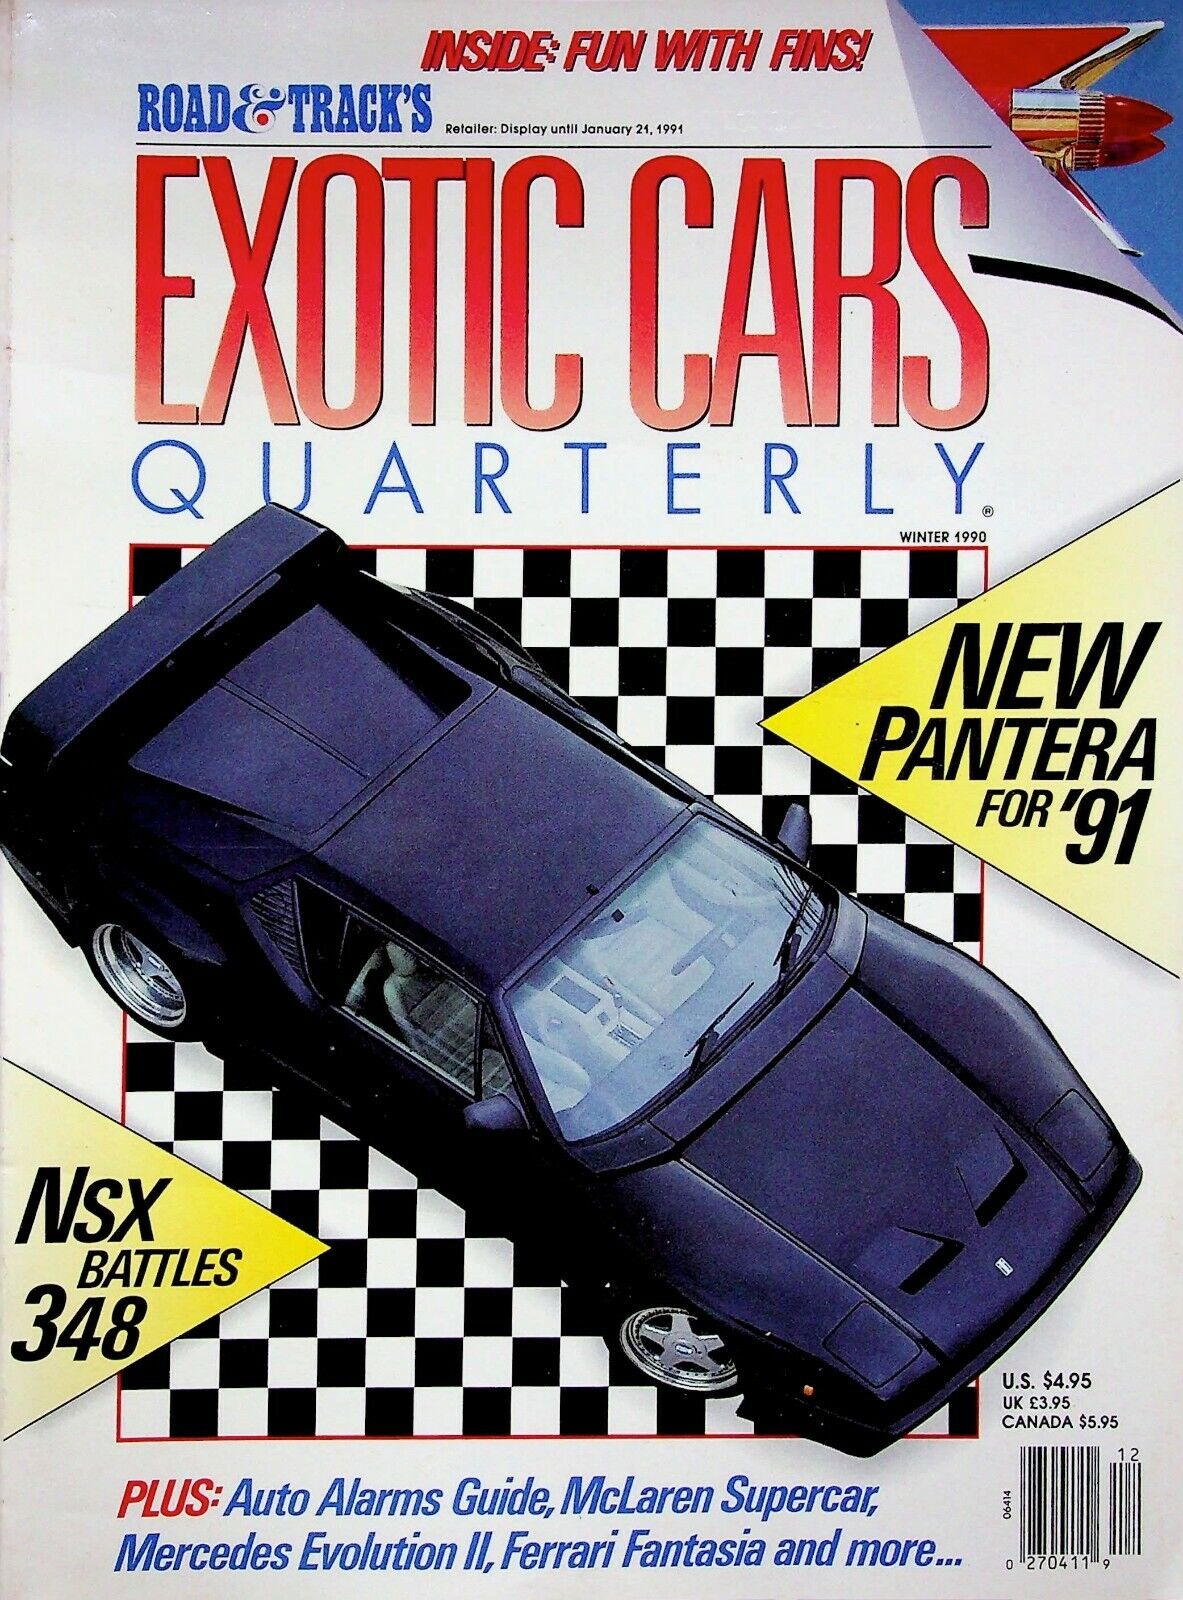 NEW PANTERA FOR 1991 - ROAD & TRACK MAGAZINE, GOOD USED CONDITION FOR READING